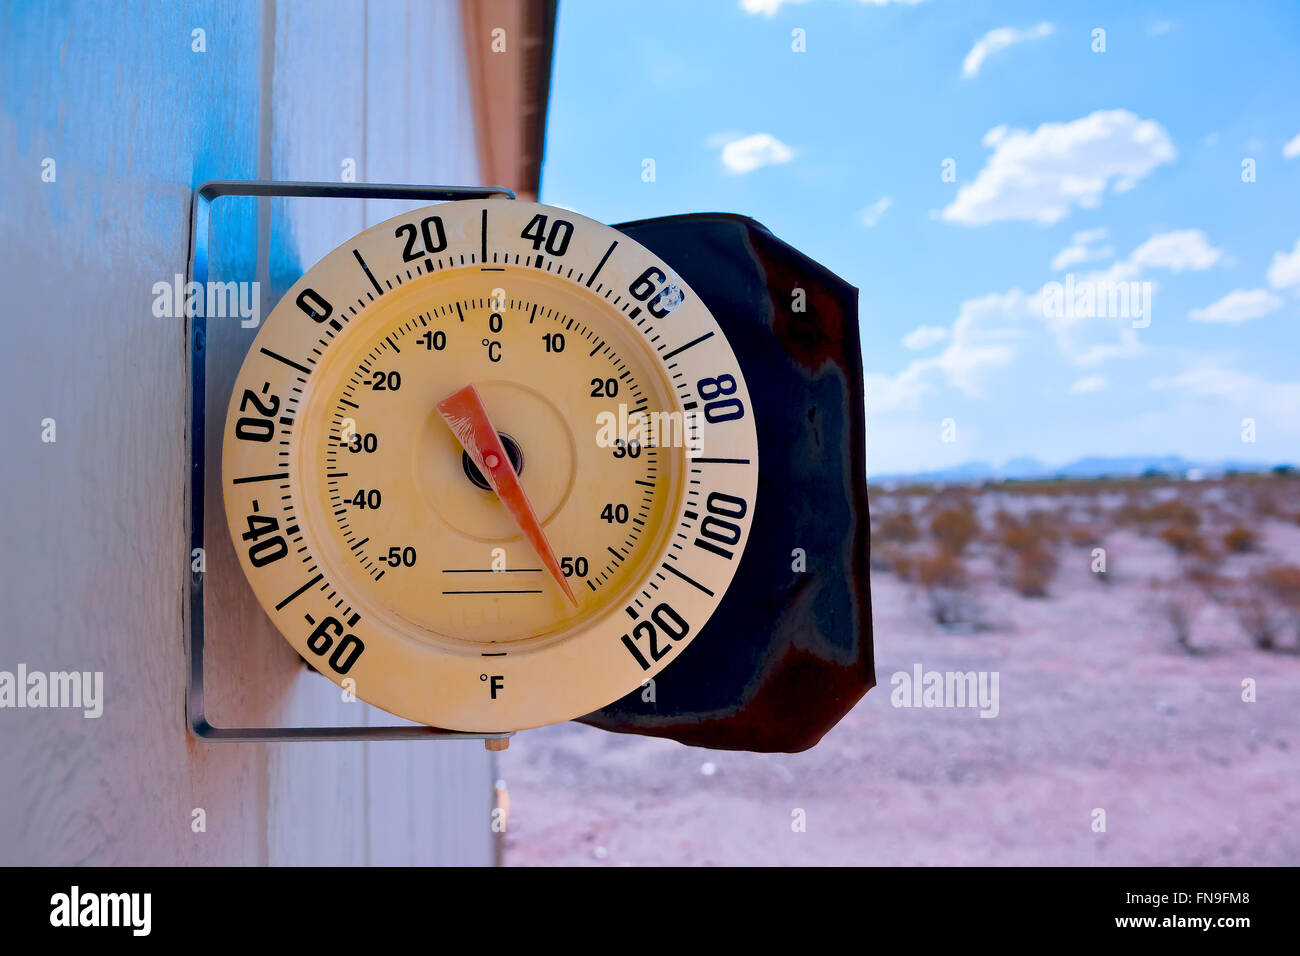 https://c8.alamy.com/comp/FN9FM8/thermometer-on-side-of-a-house-arizona-united-states-FN9FM8.jpg